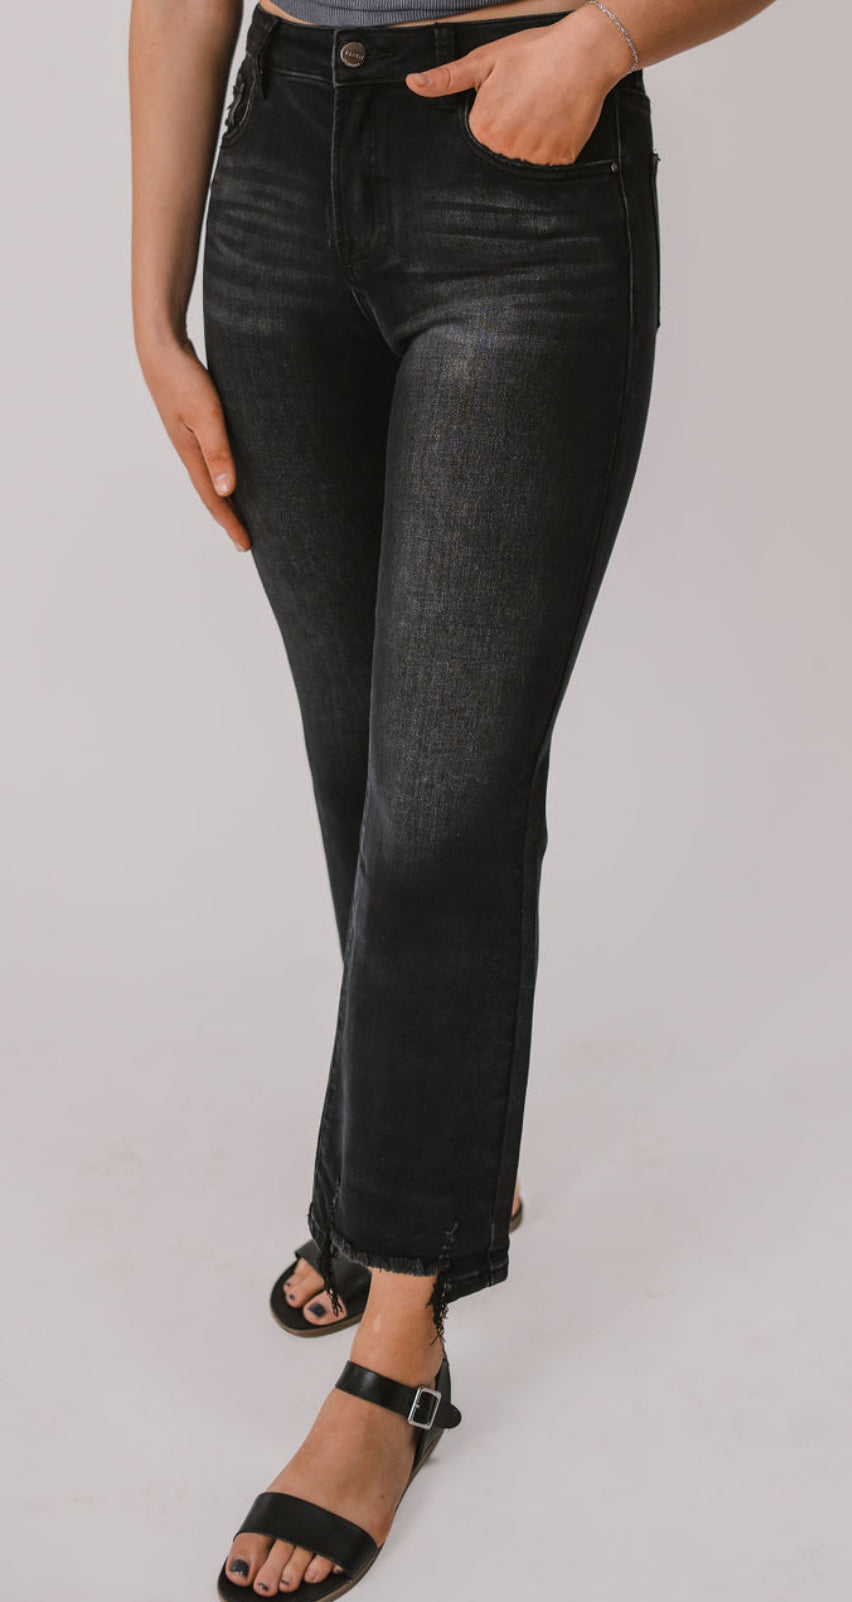 The Black High Rise Relaxed Renee Jeans